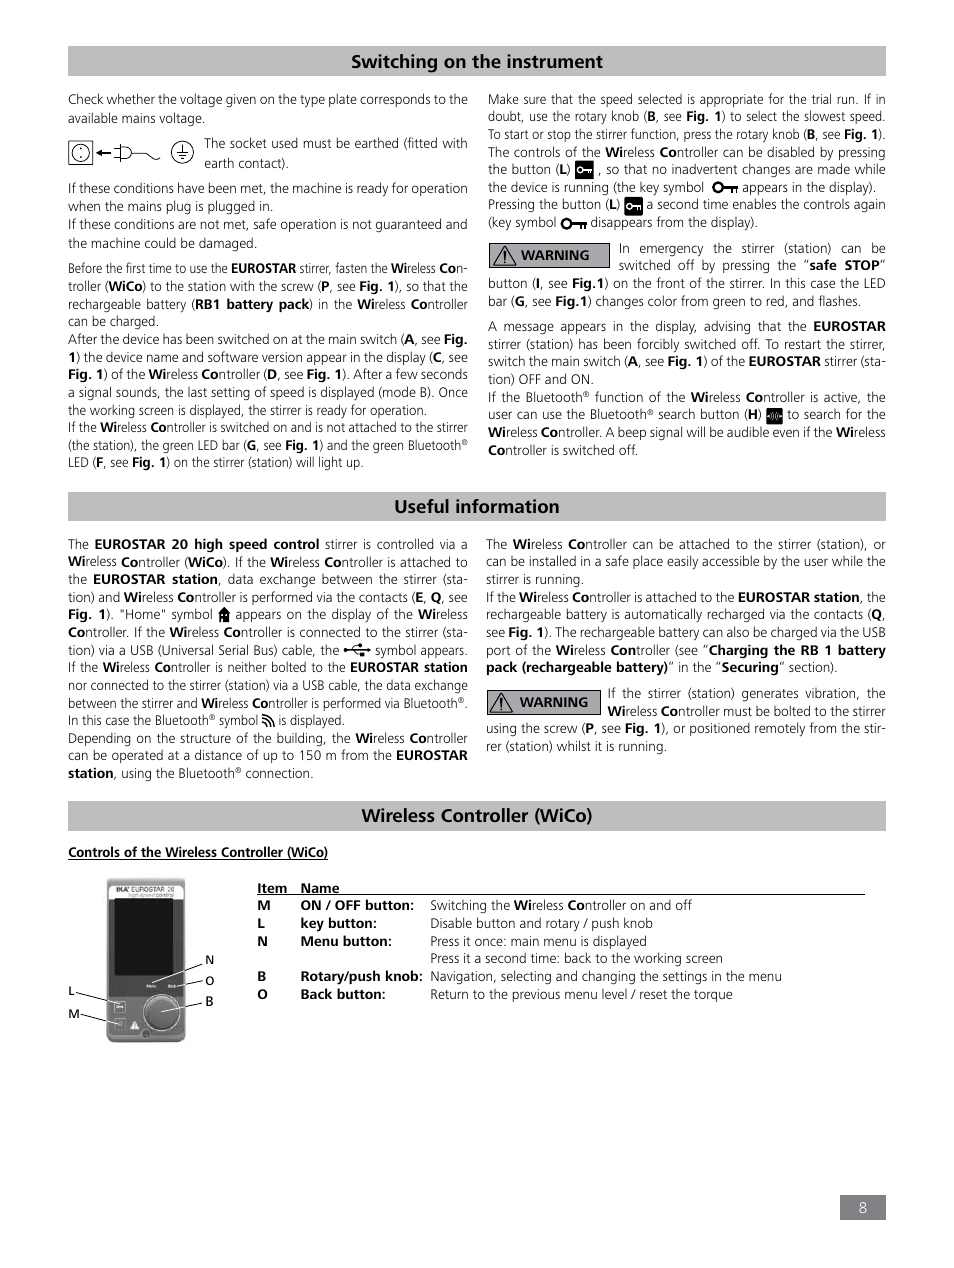 Useful information, Wireless controller (wico), Switching on the instrument | IKA EUROSTAR 20 high speed control User Manual | Page 8 / 19